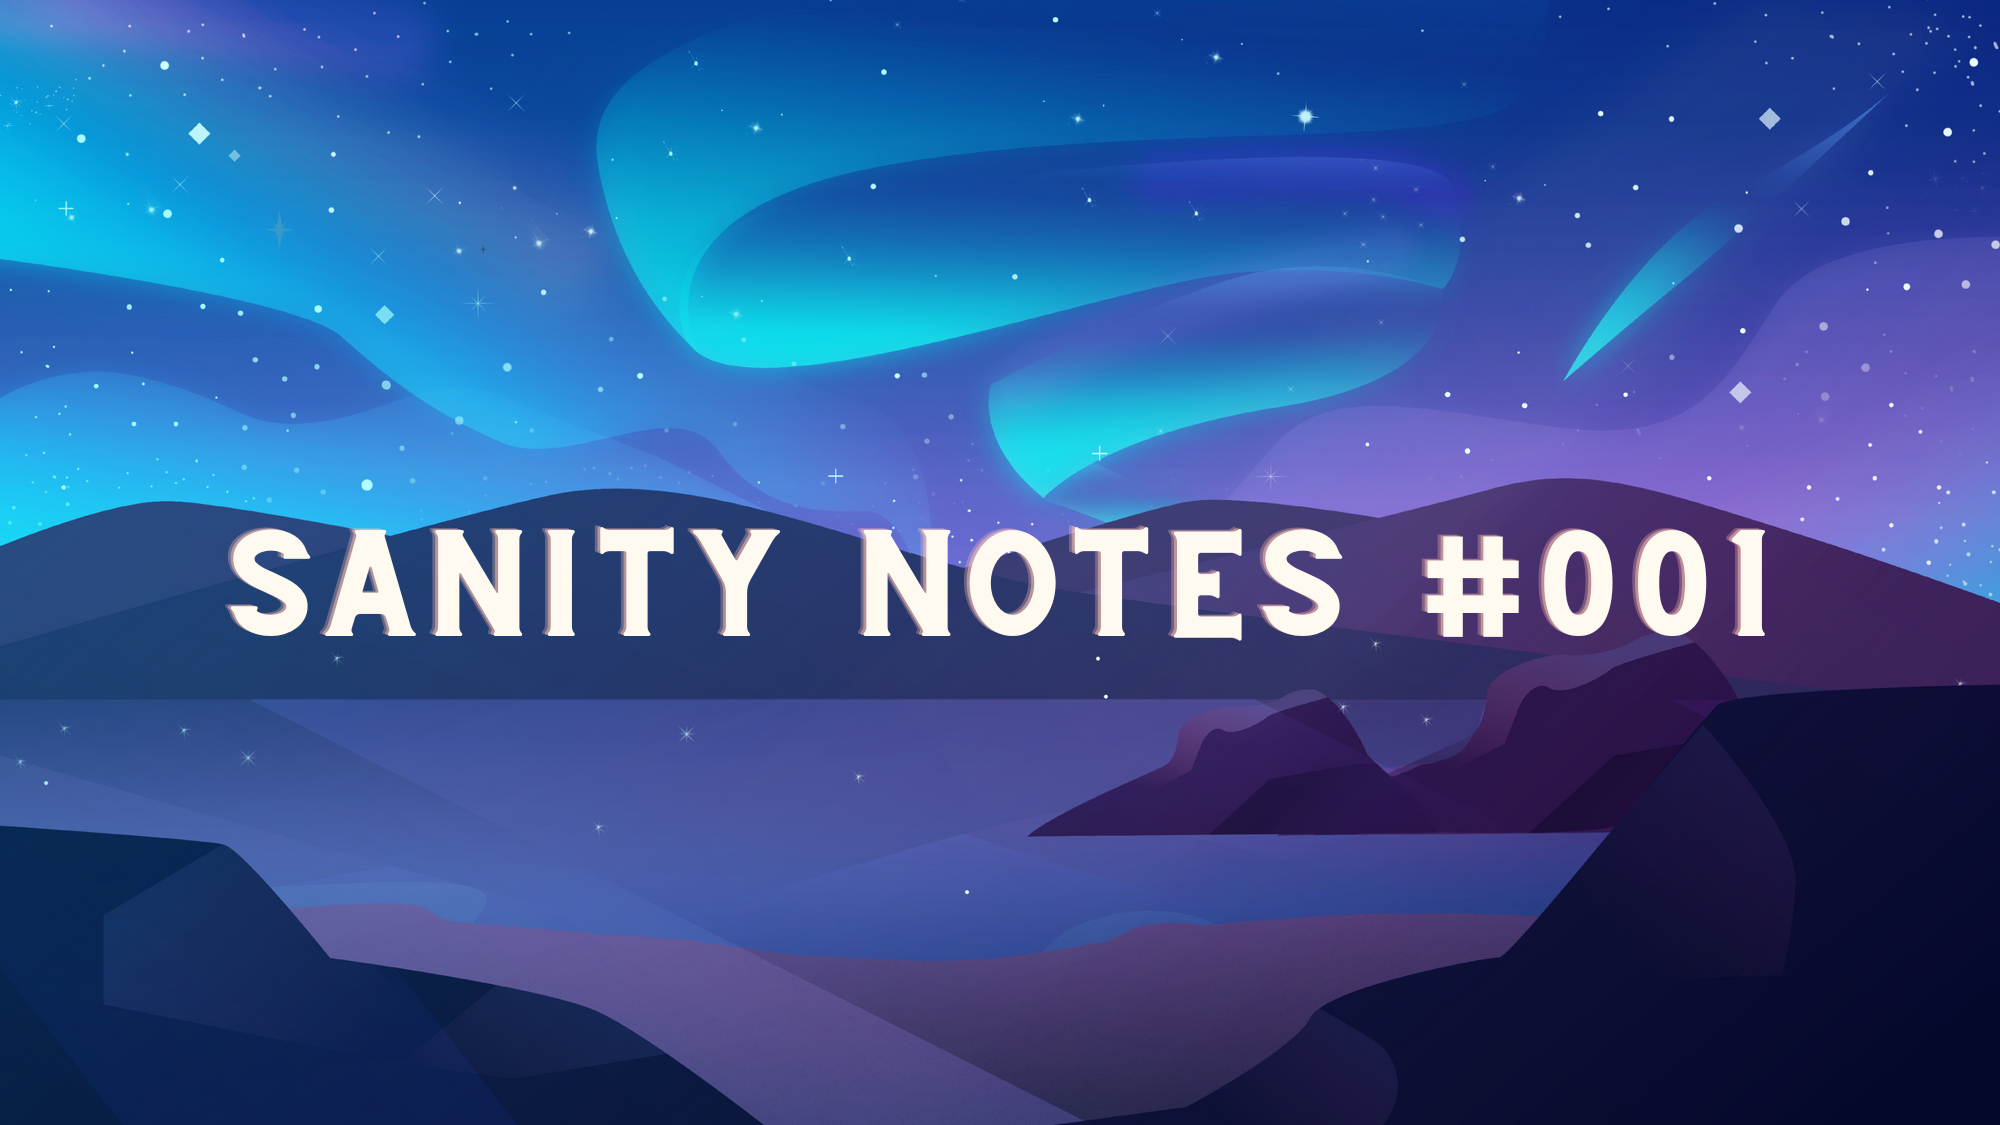 Sanity Notes #001 : Introducing Sanity Notes